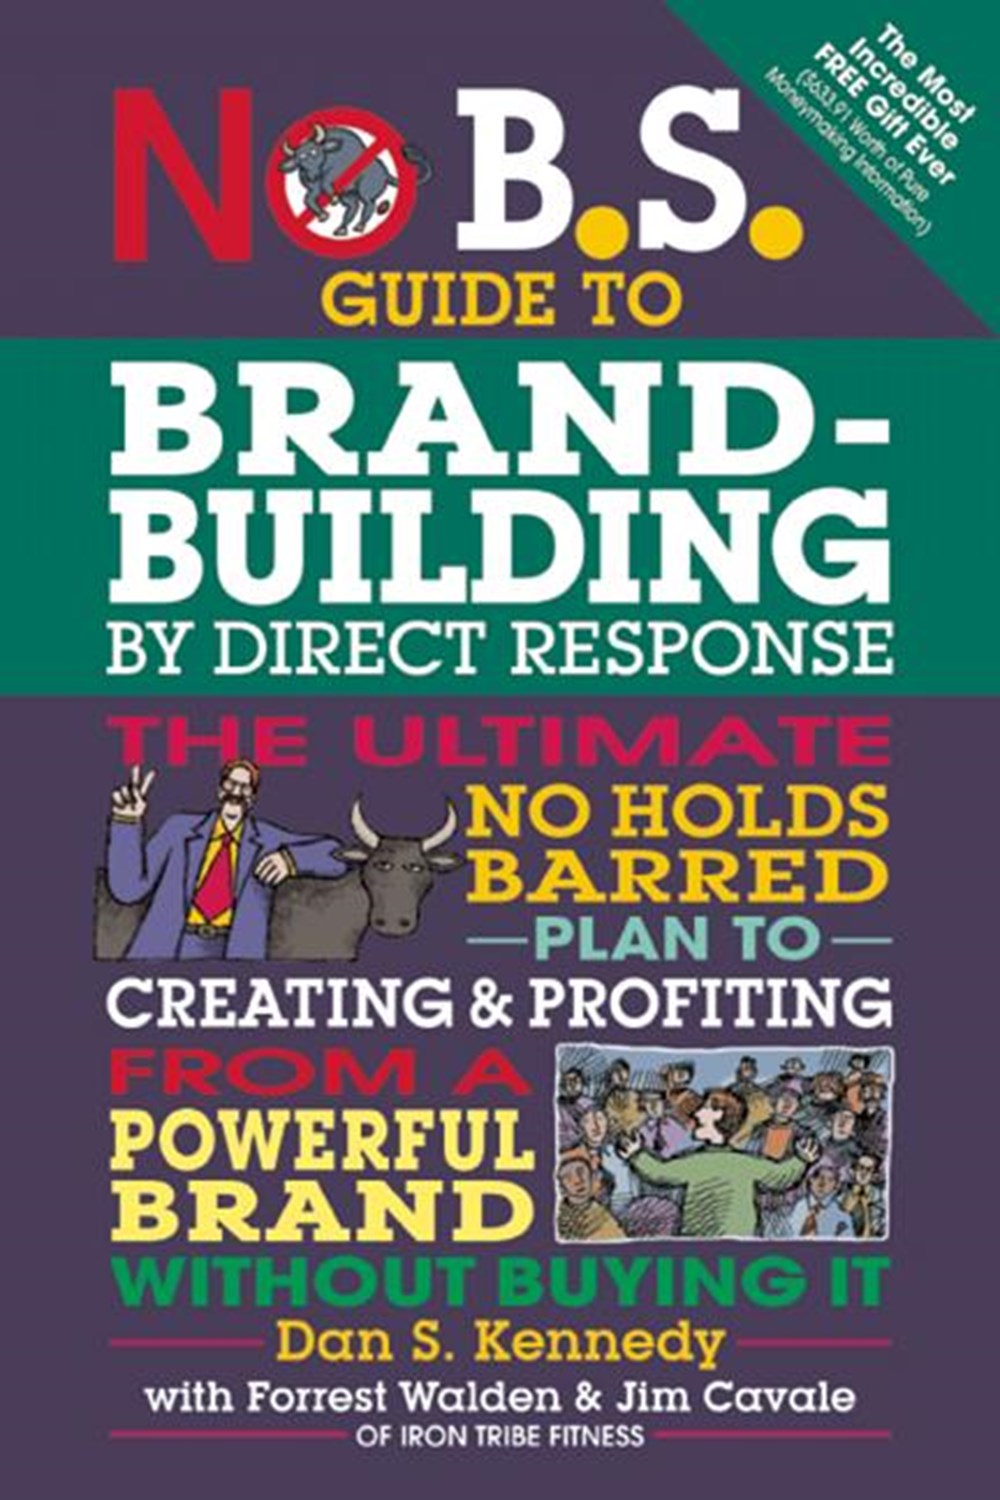 No B.S. Guide to Brand-Building by Direct Response: The Ultimate No Holds Barred Plan to Creating an